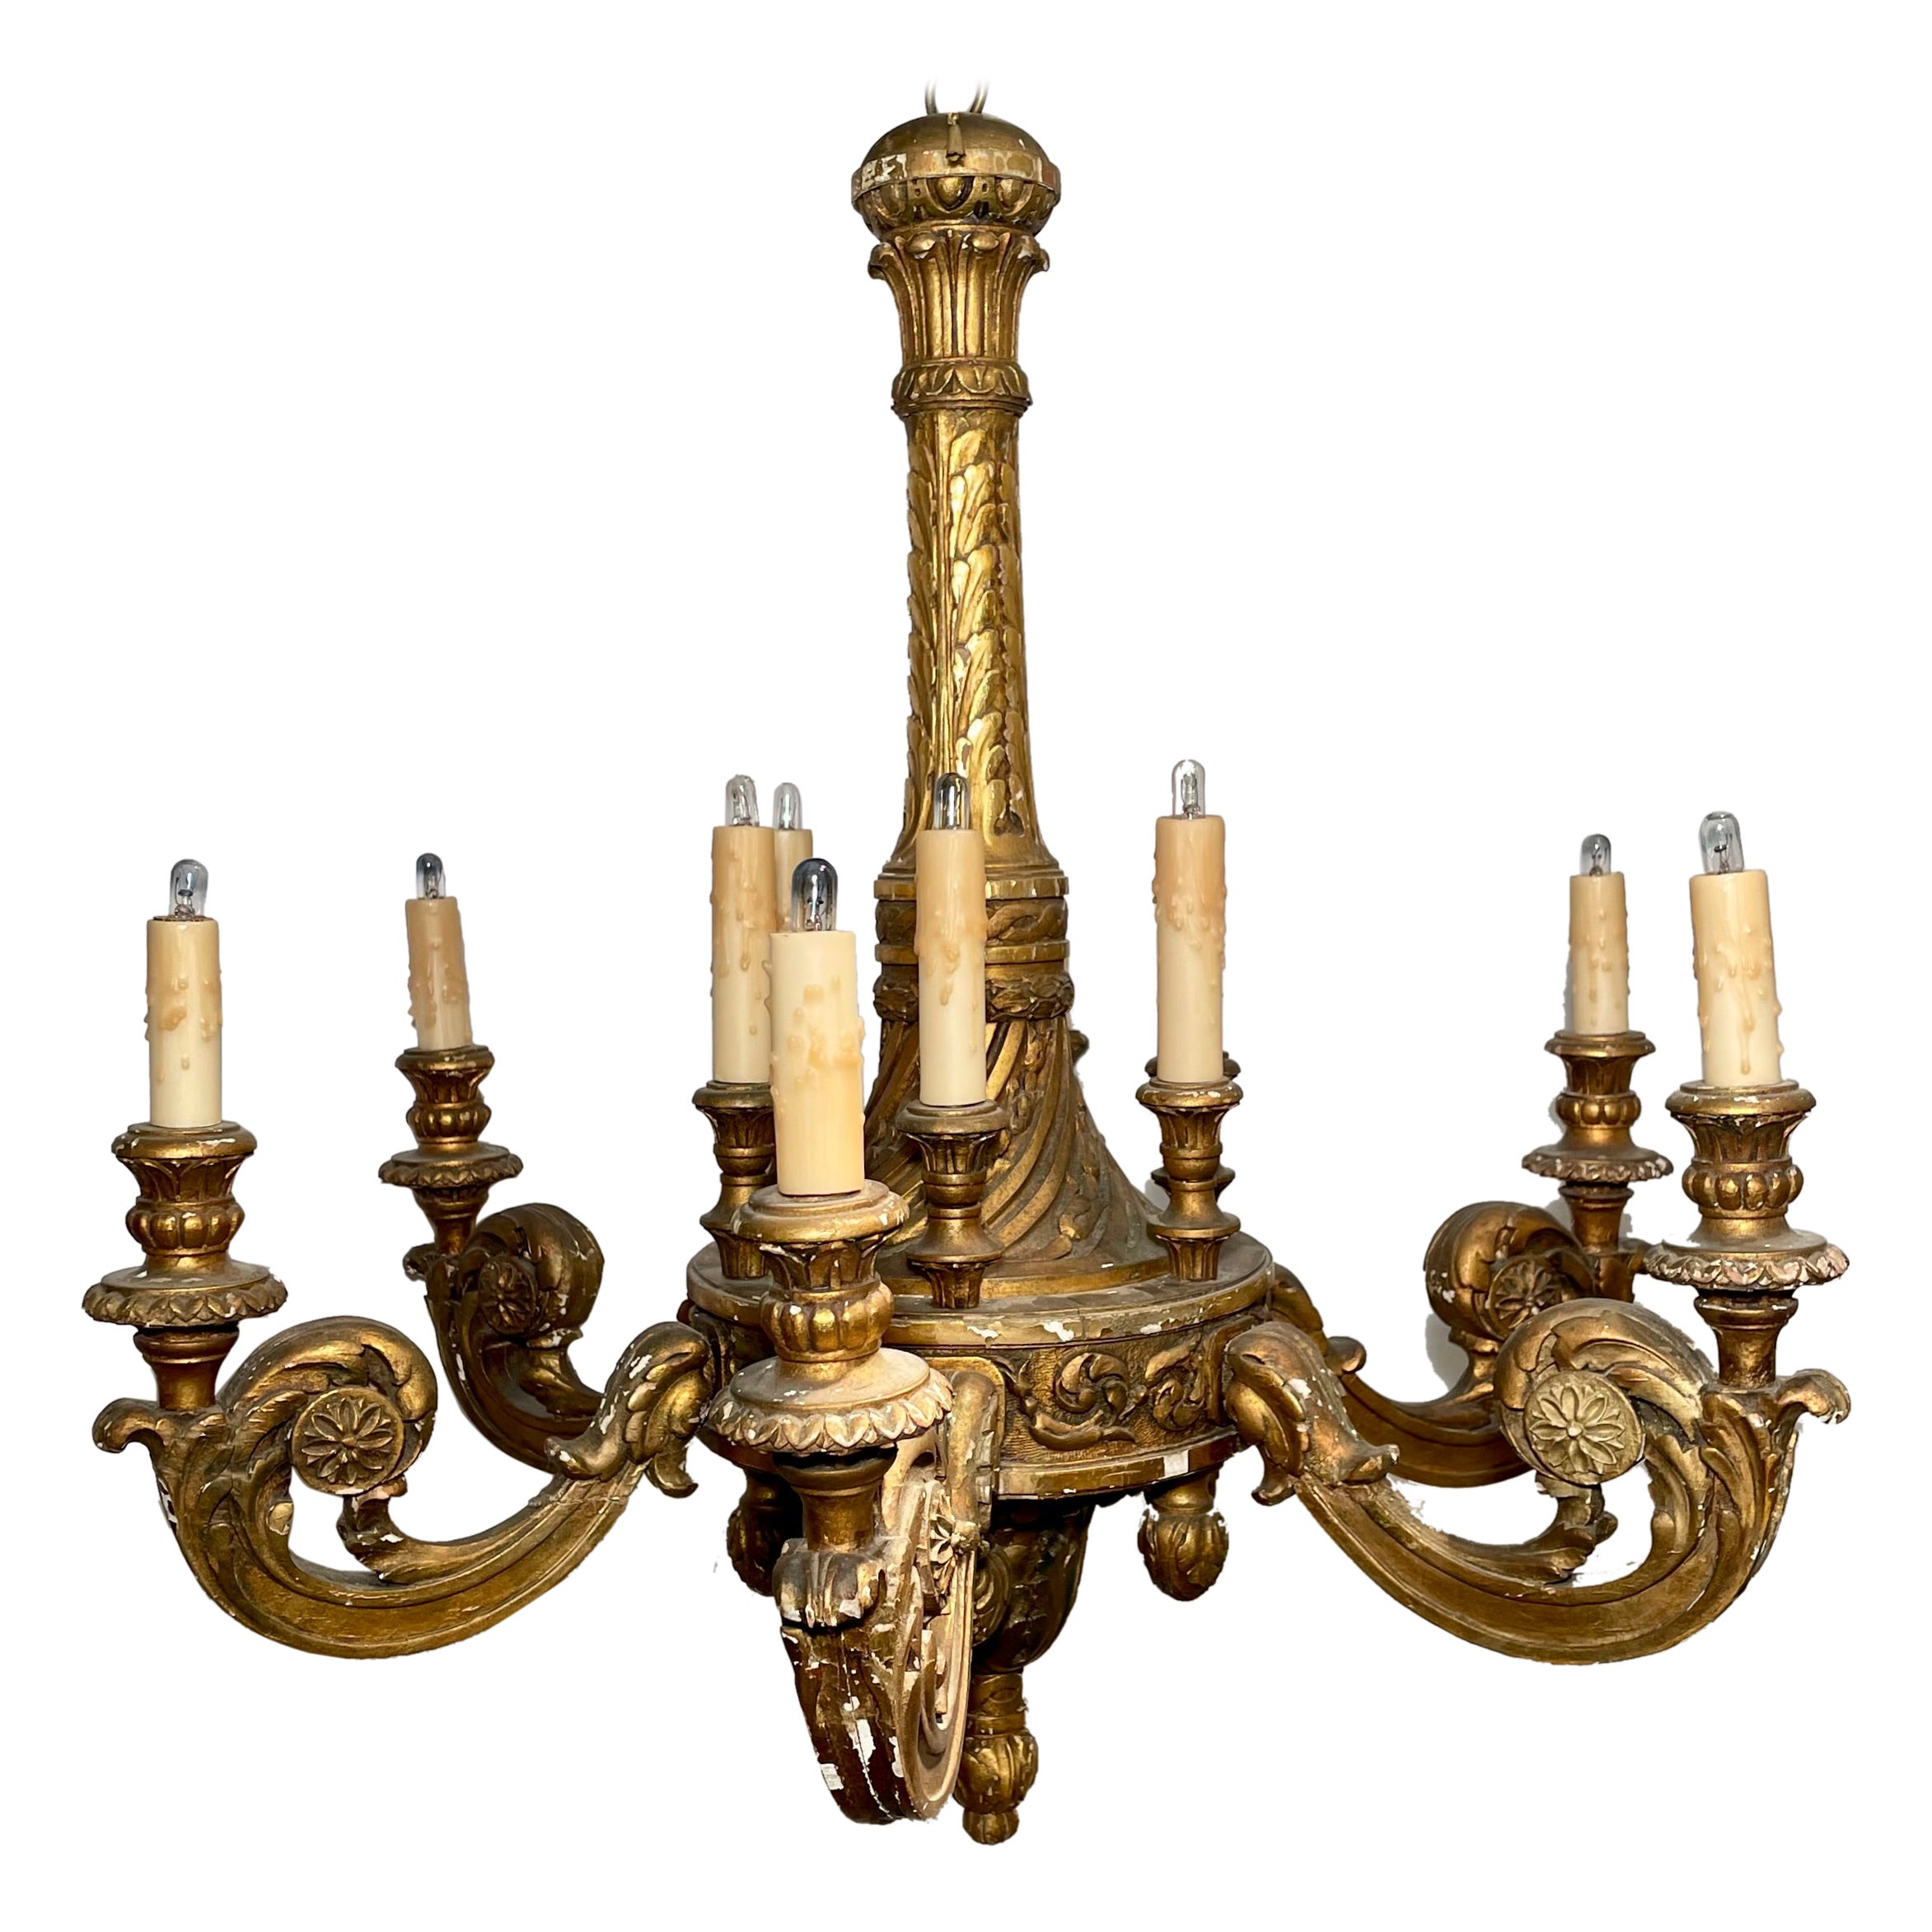 Antique Early 19th Century Two-Tier Giltwood "Regence" Chandelier For Sale